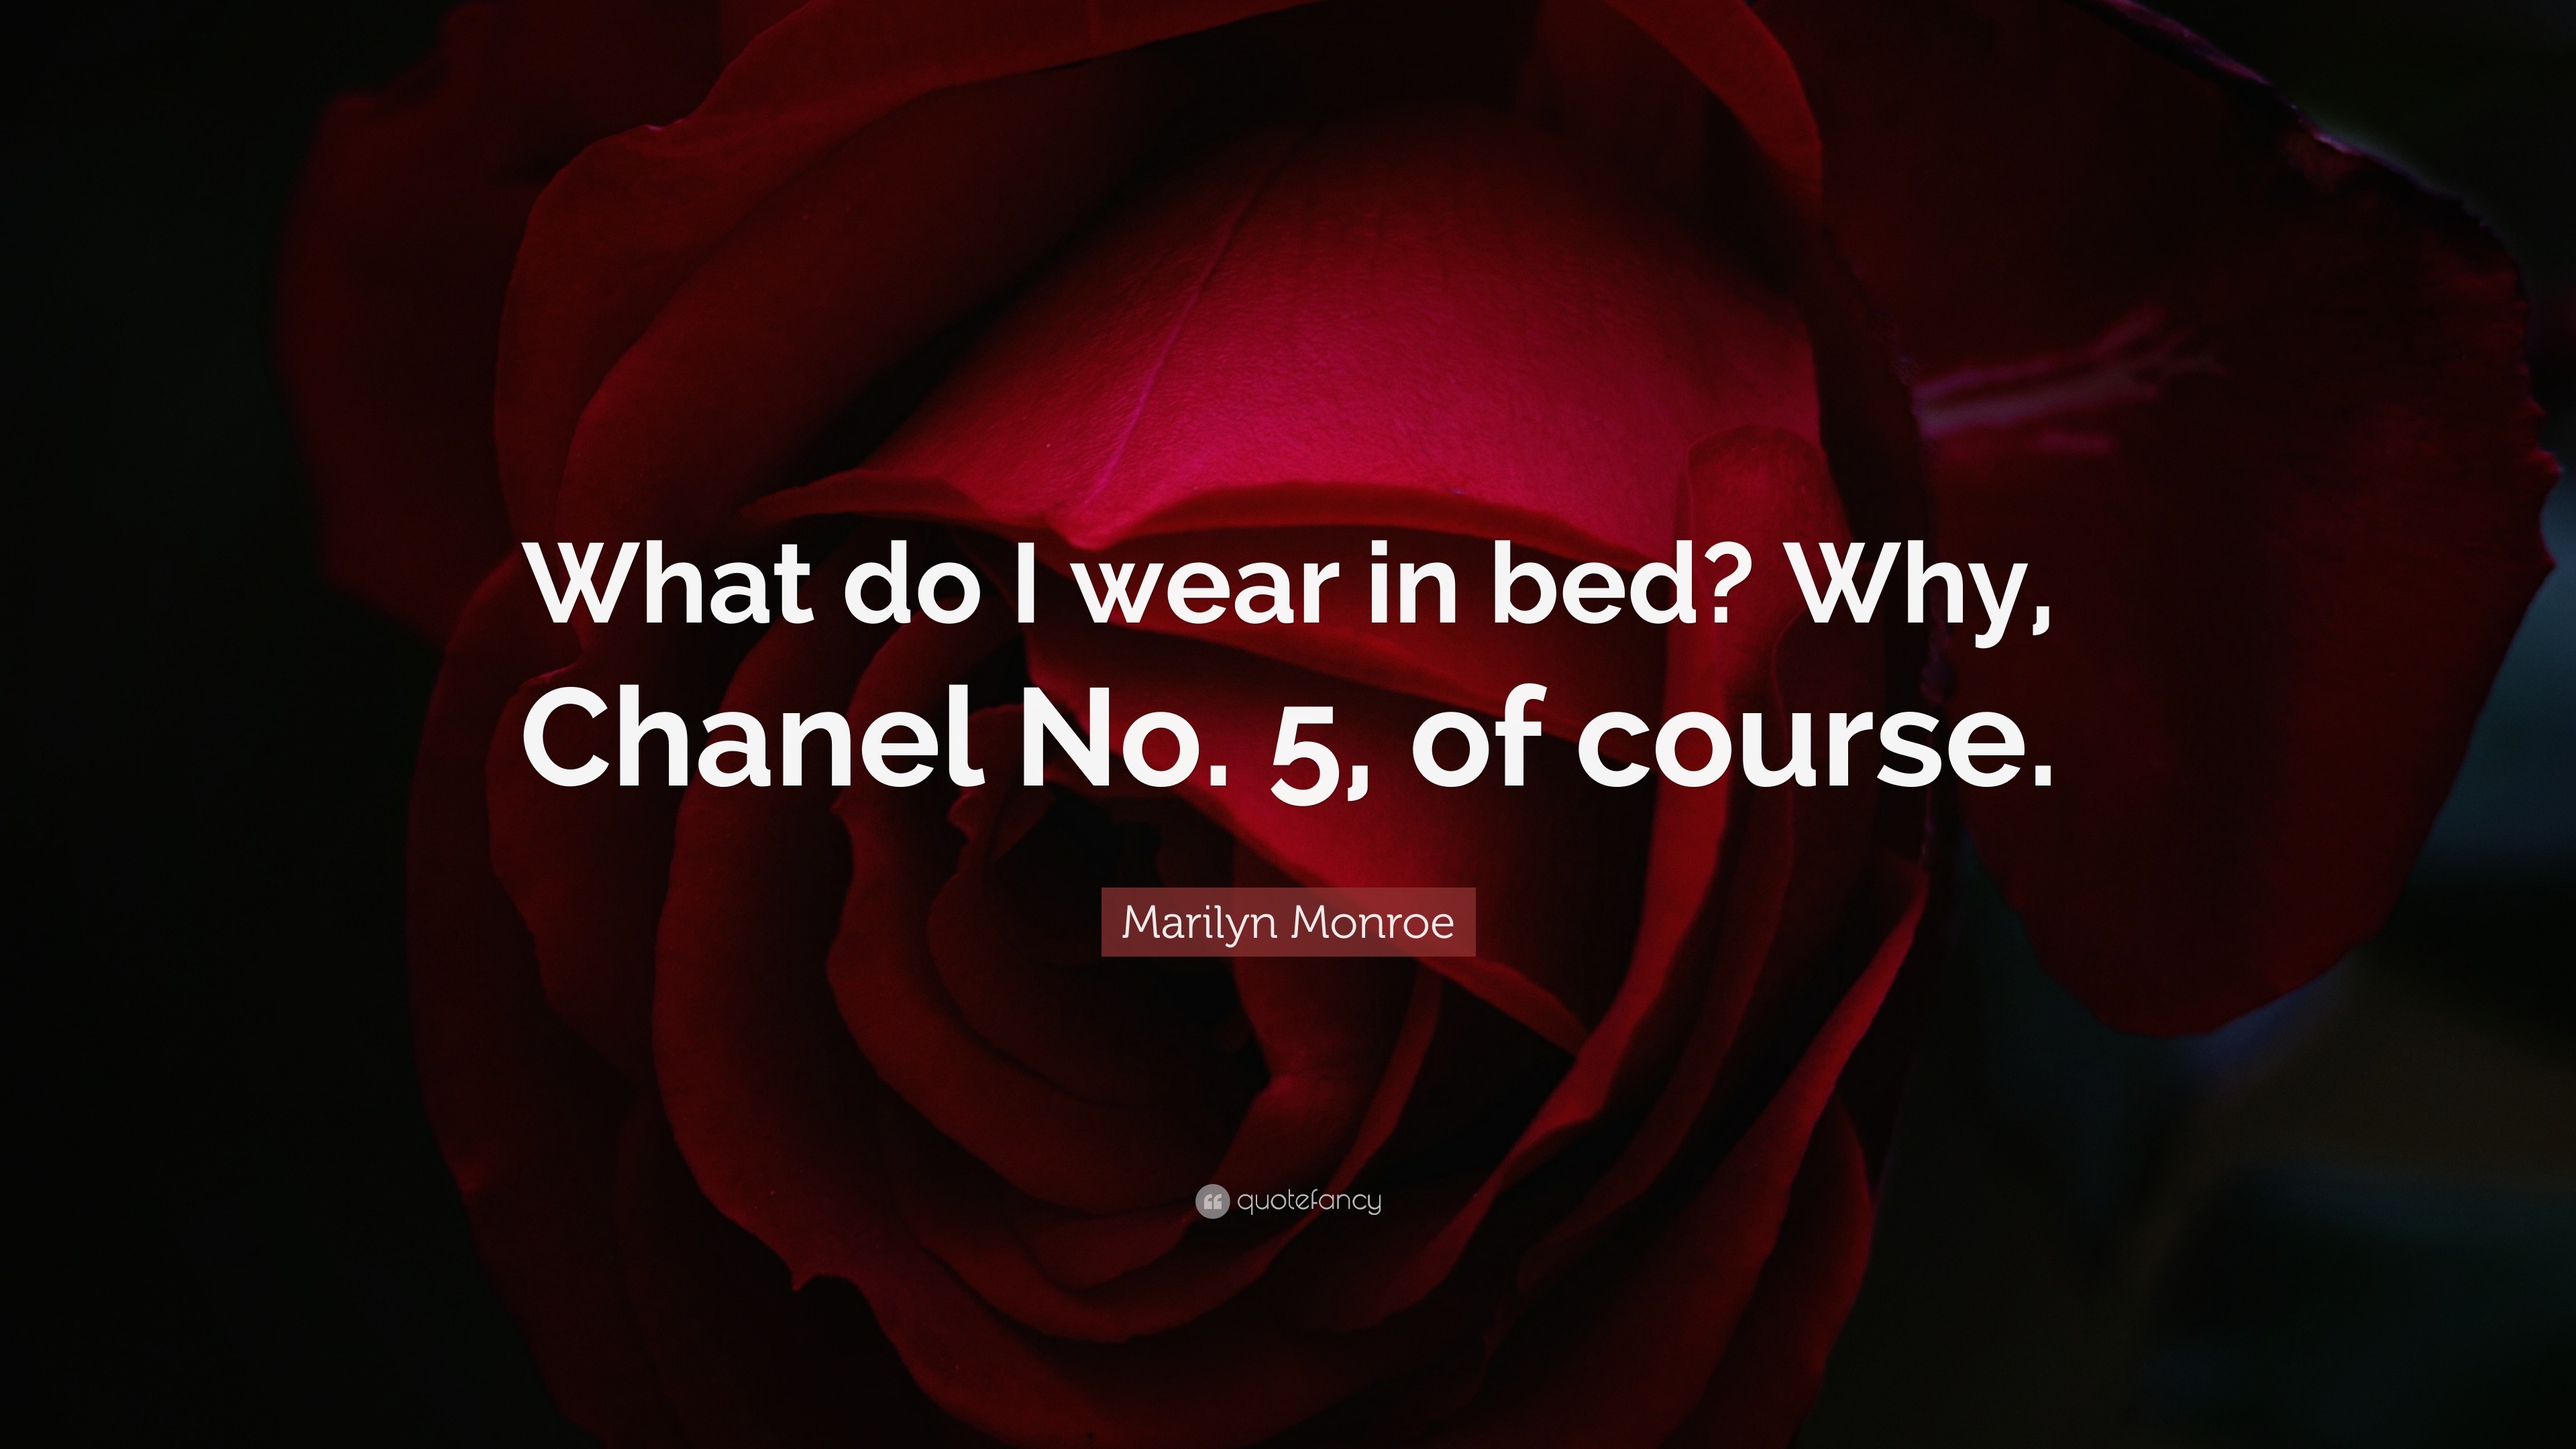 Marilyn Monroe Quote: “What do wear bed? Why, Chanel No. 5, course.”